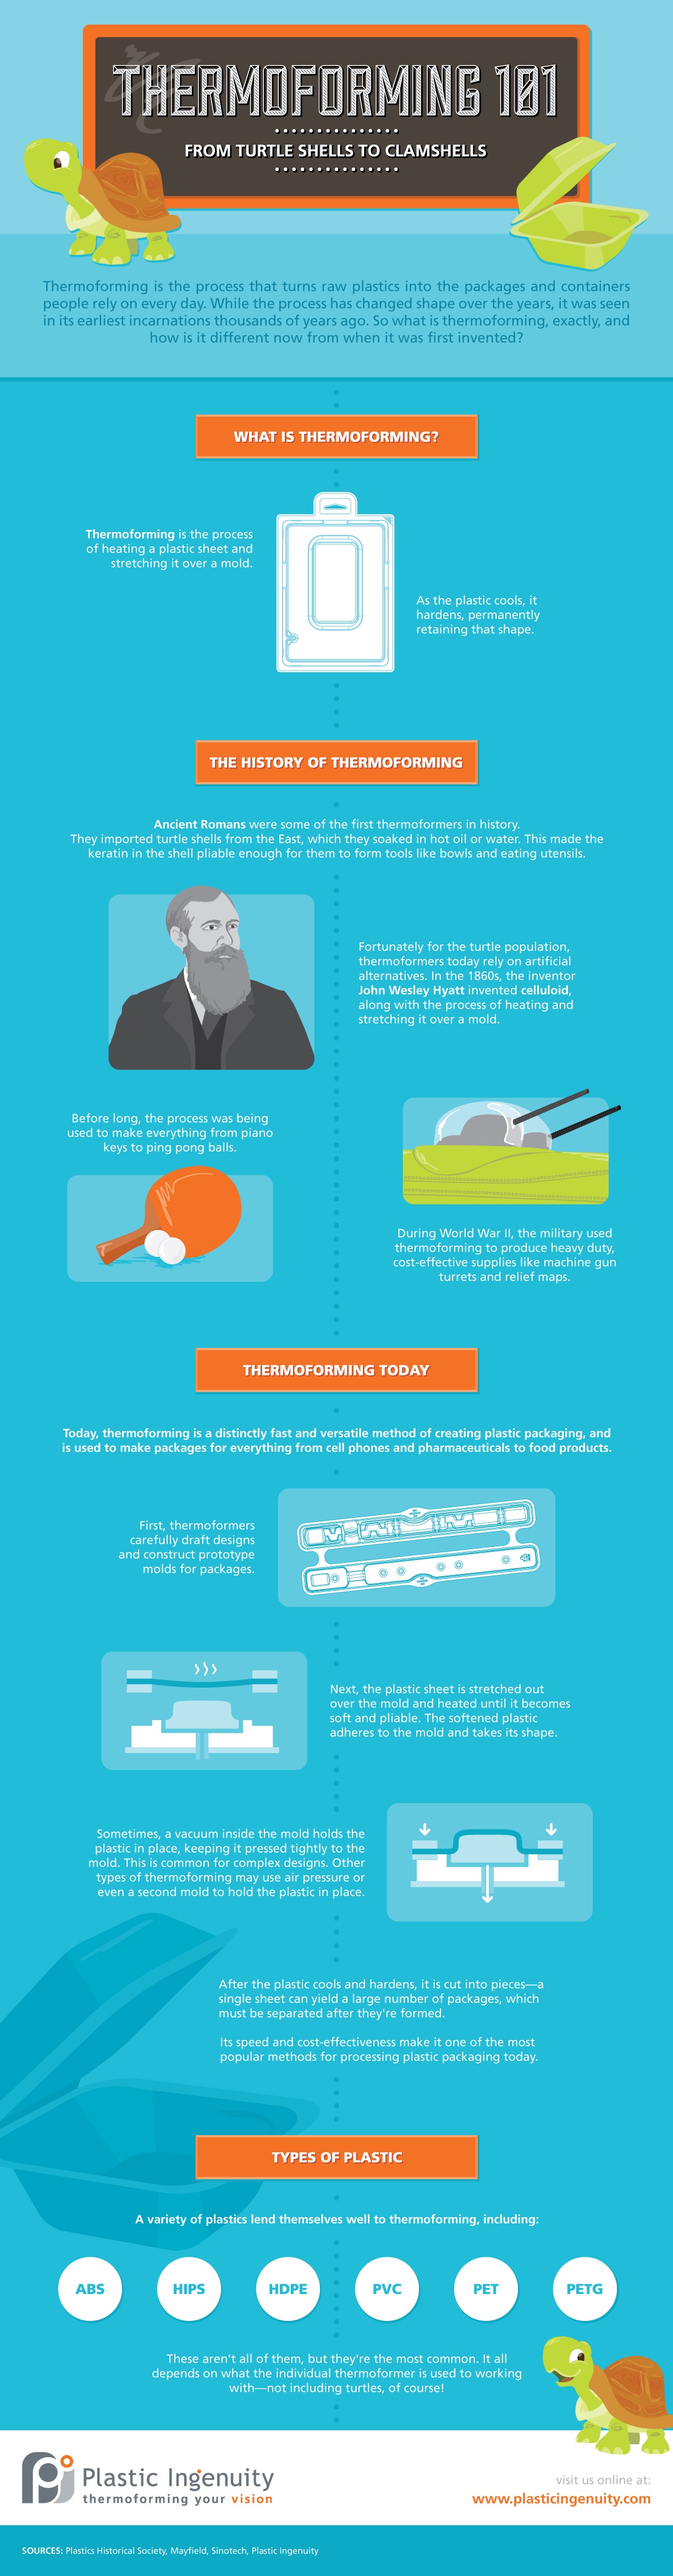 PlasticIngenuity_Thermoforming101-Infographic